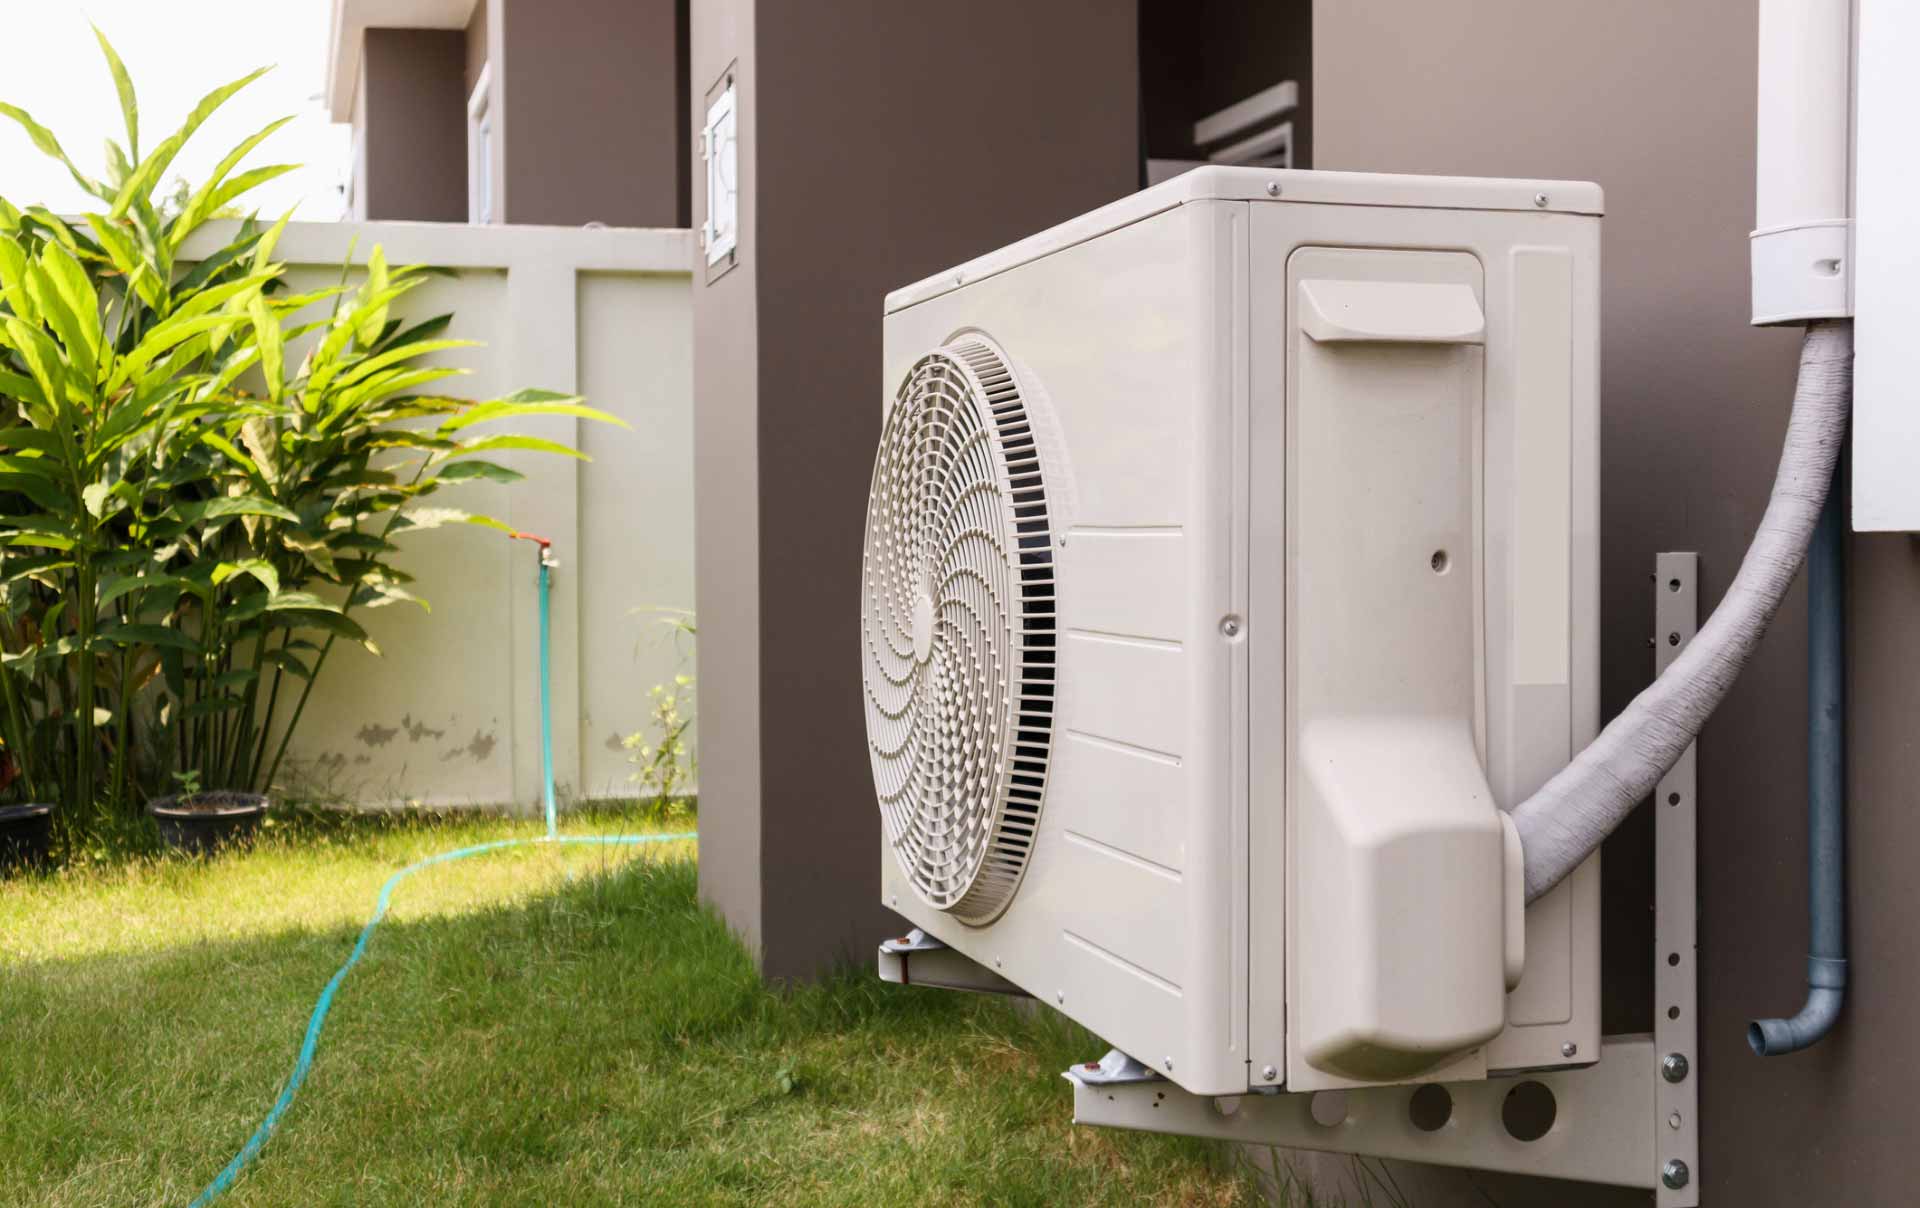 Six indications That You Need Air Conditioner Repair